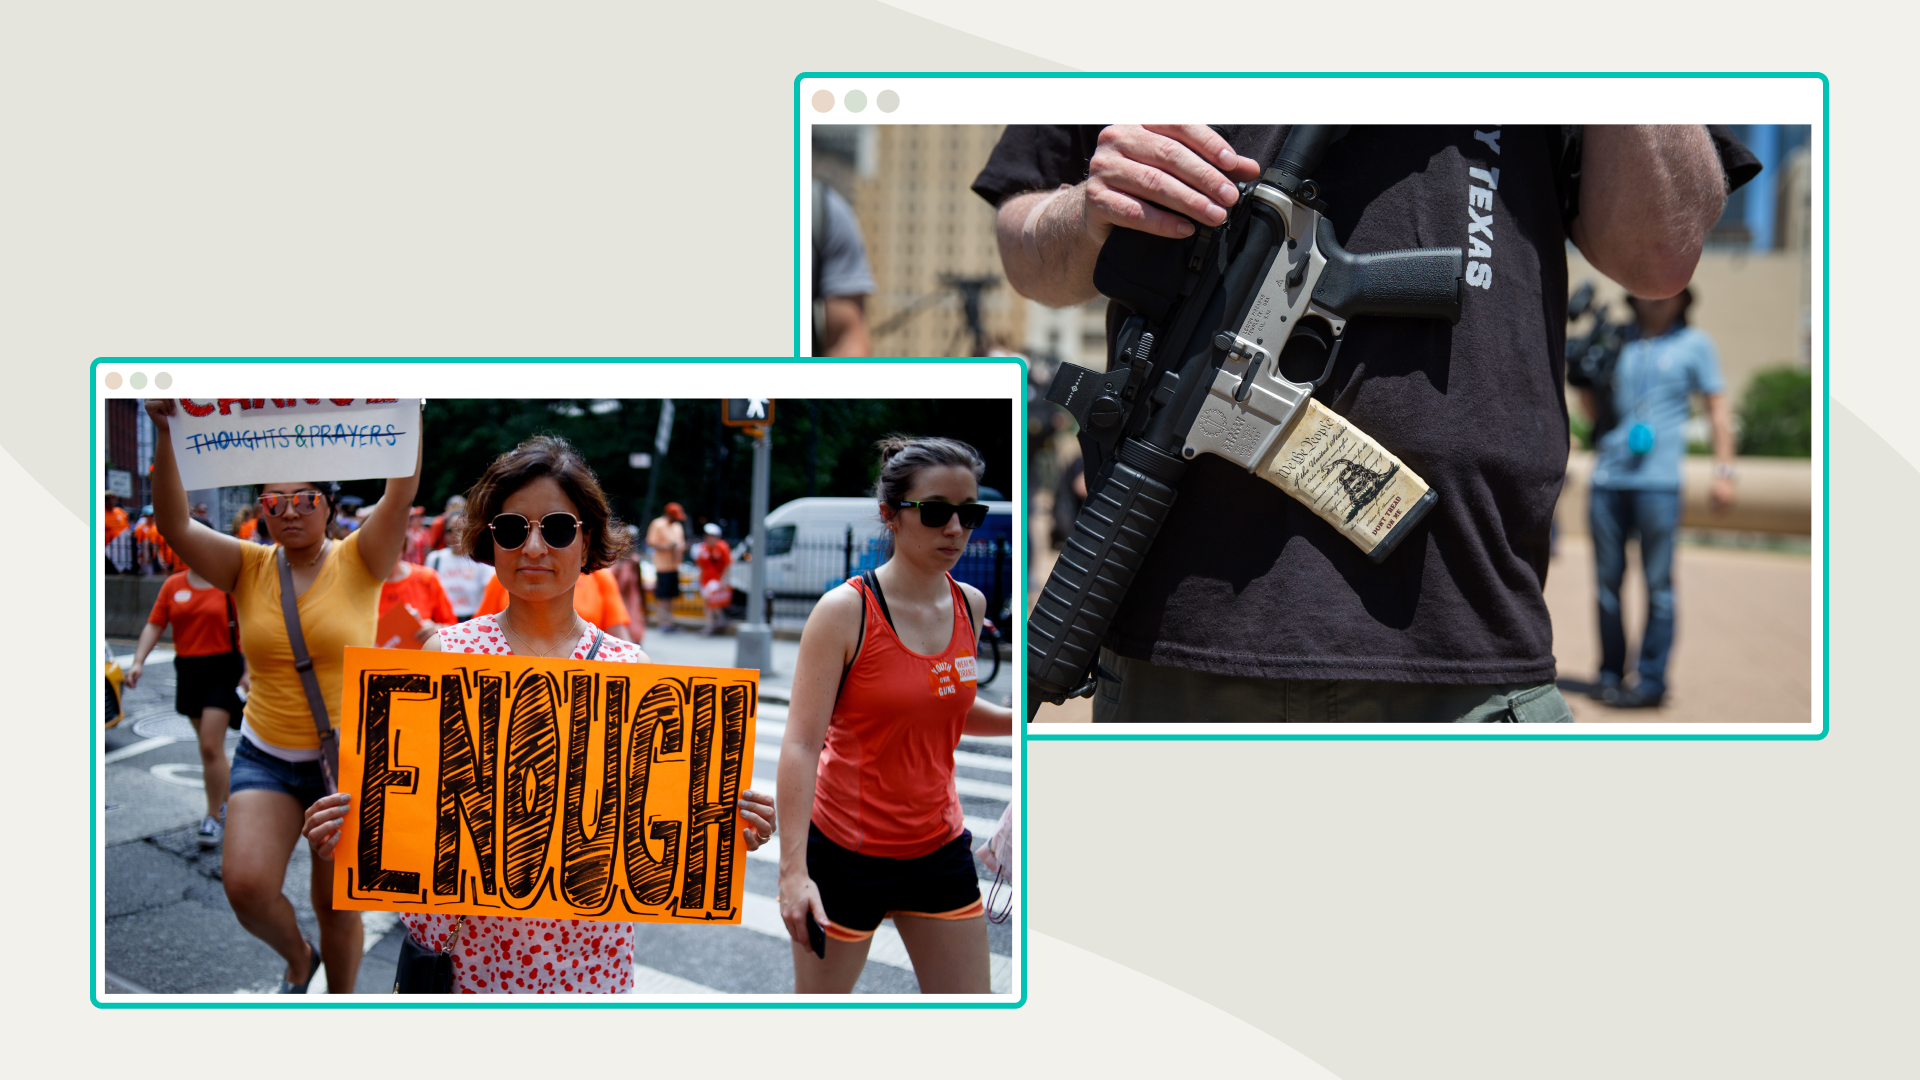 Two photos side-by-side show protesters calling for gun reform and a close-up of an assault-style rifle